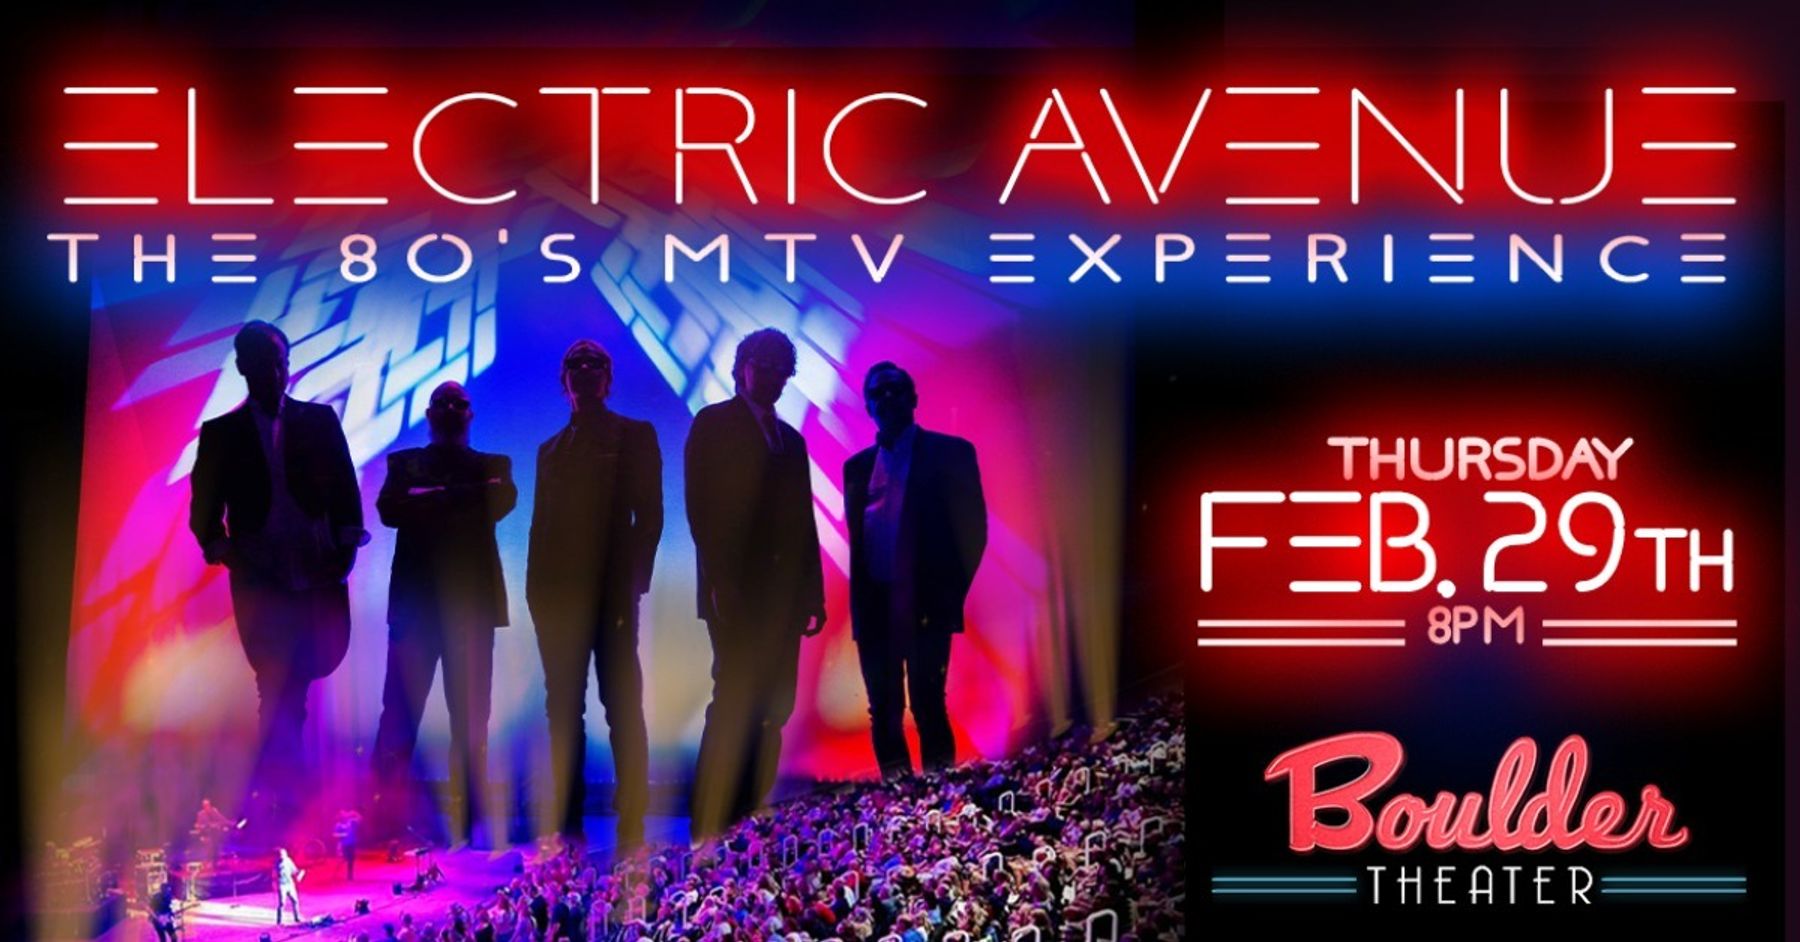 Electric Avenue: The 80's MTV Experience